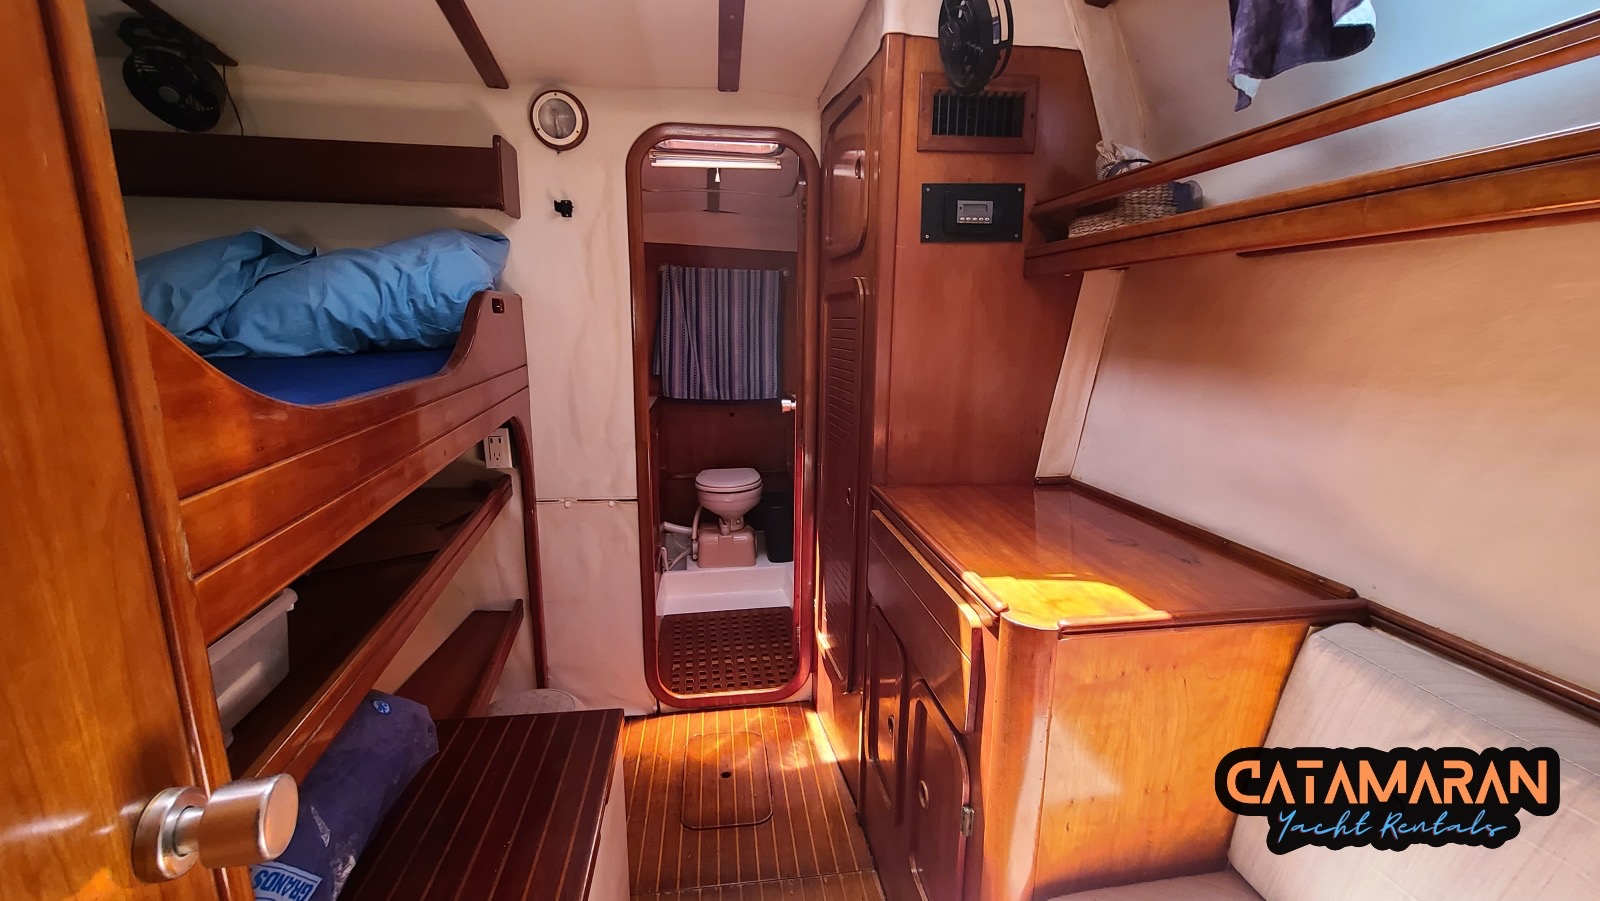 The catamaran has a total of 4 beds